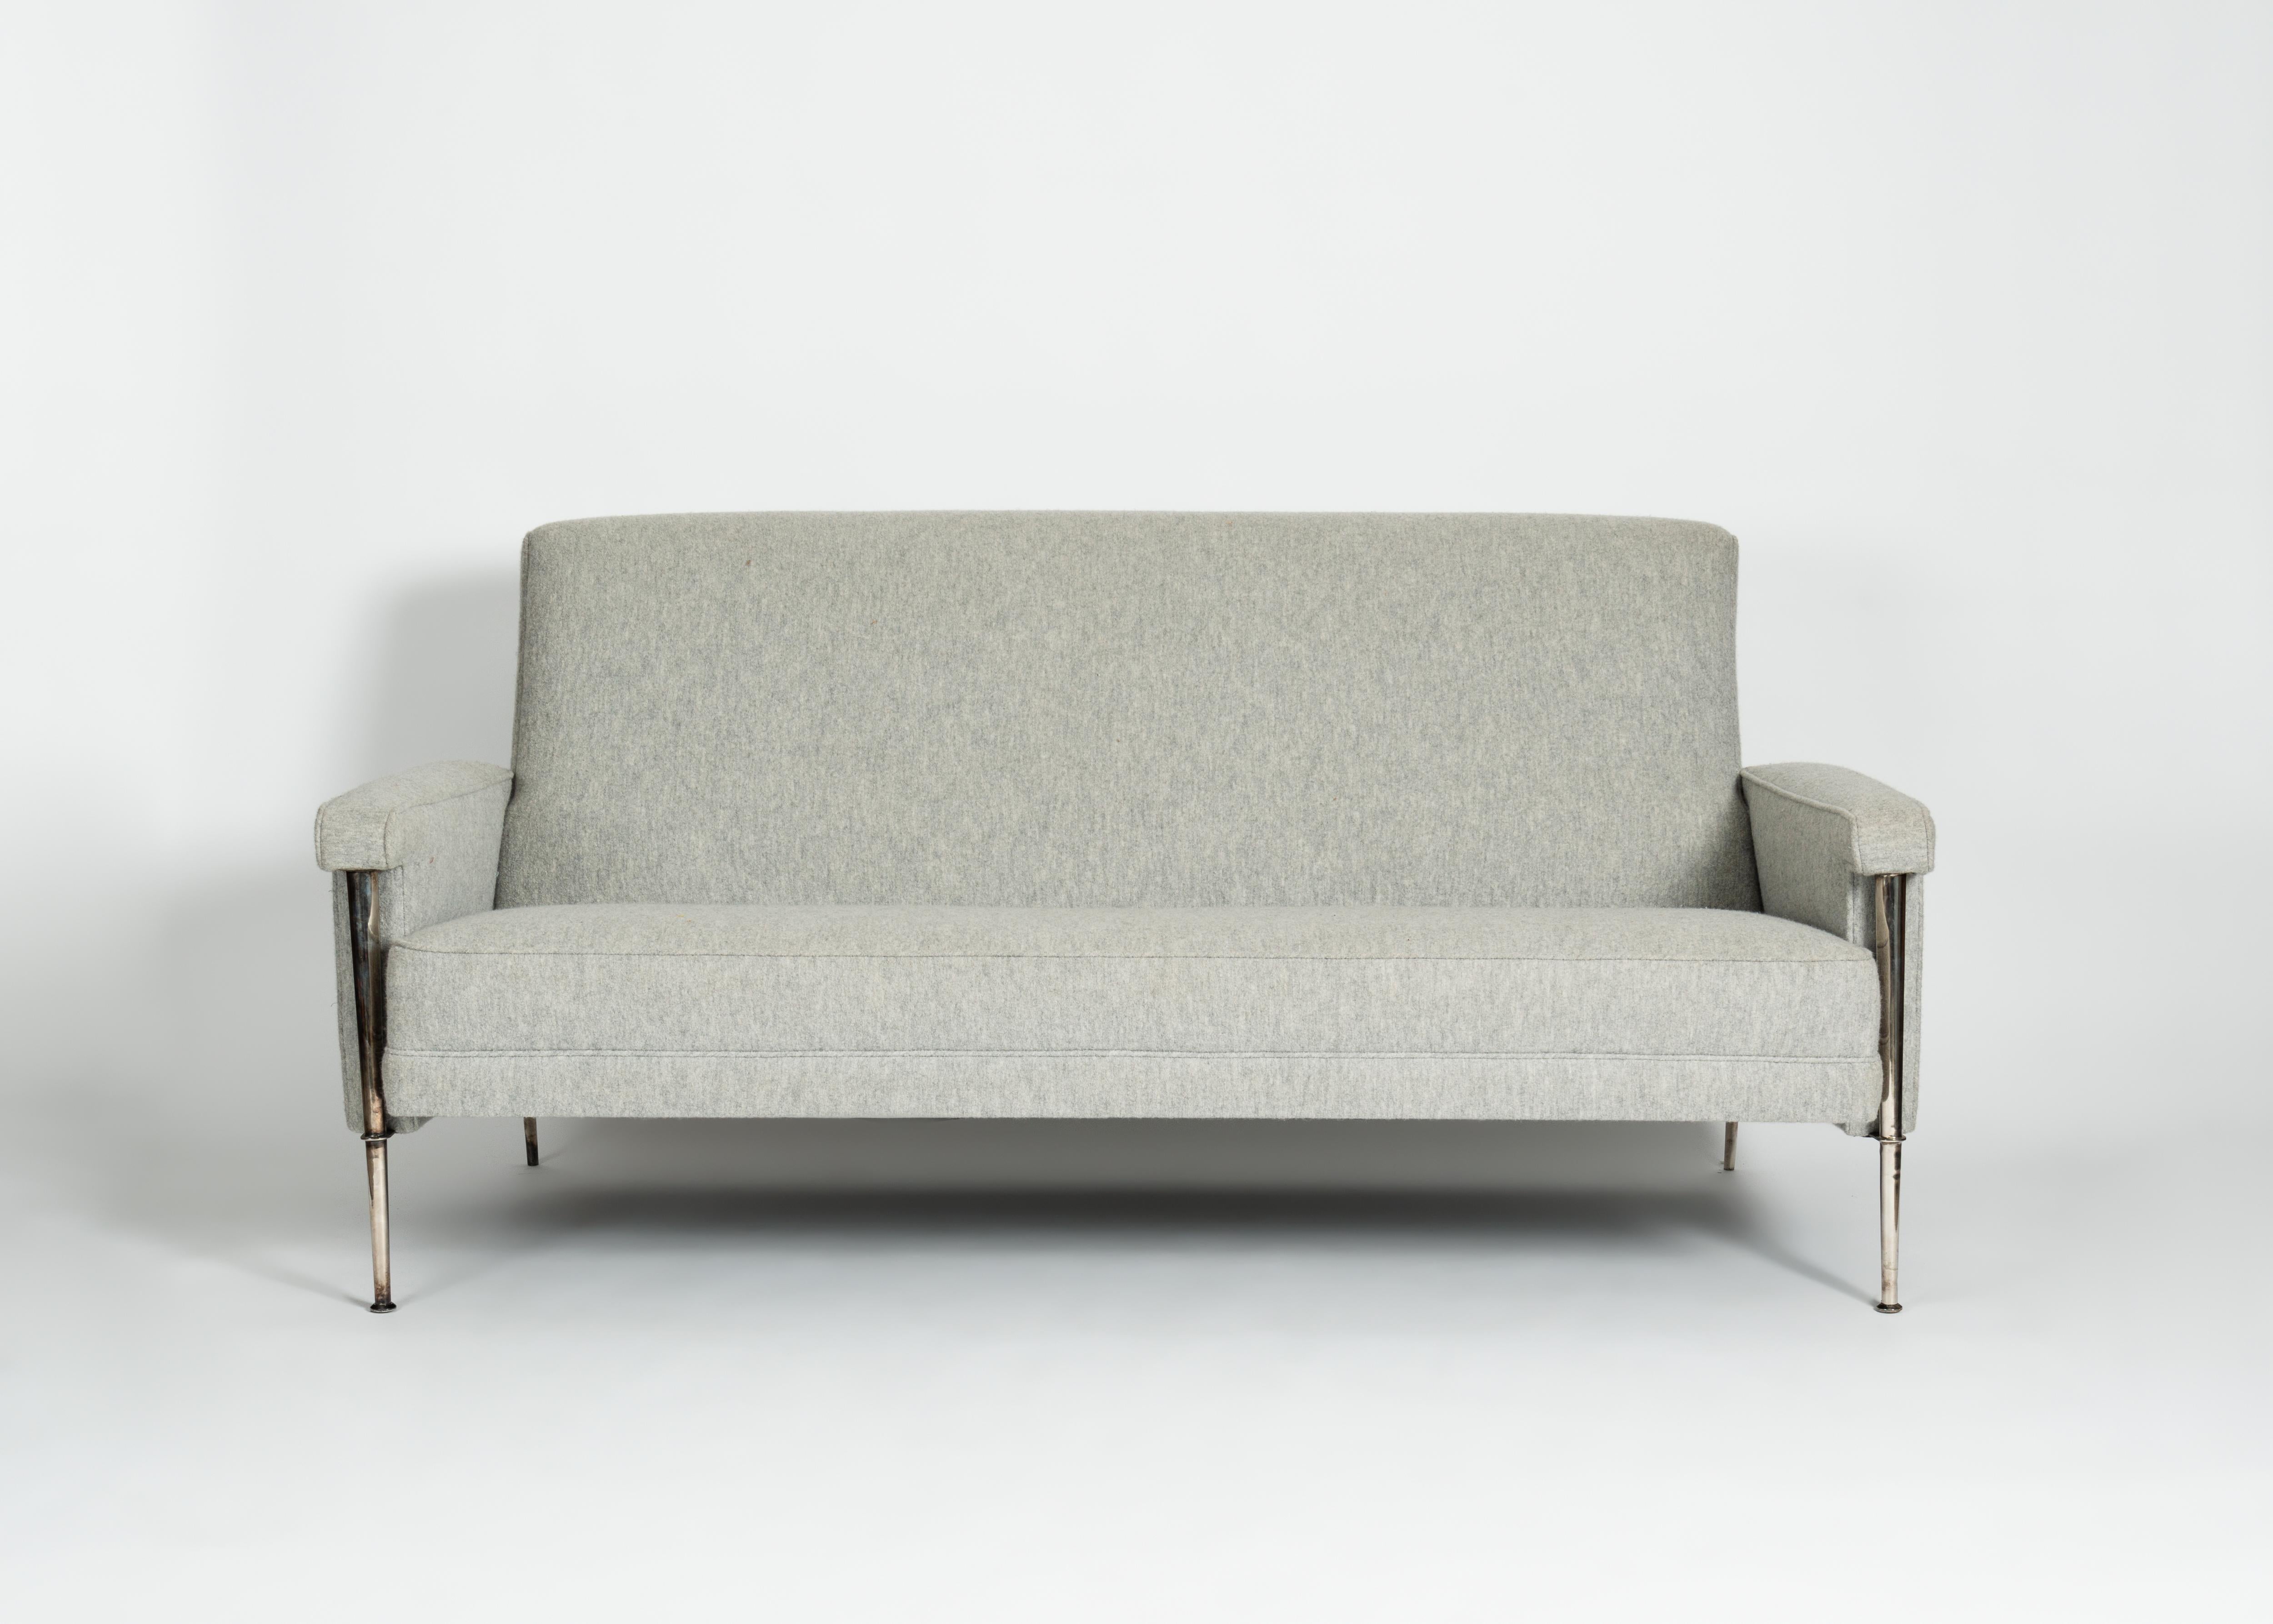 This scaled down midcentury three-seat sofa by Batistin Spade possesses the designer's recognizable thin legs, in this case silvered, and has a broad back set at a charming angle from it's comfortable seat.